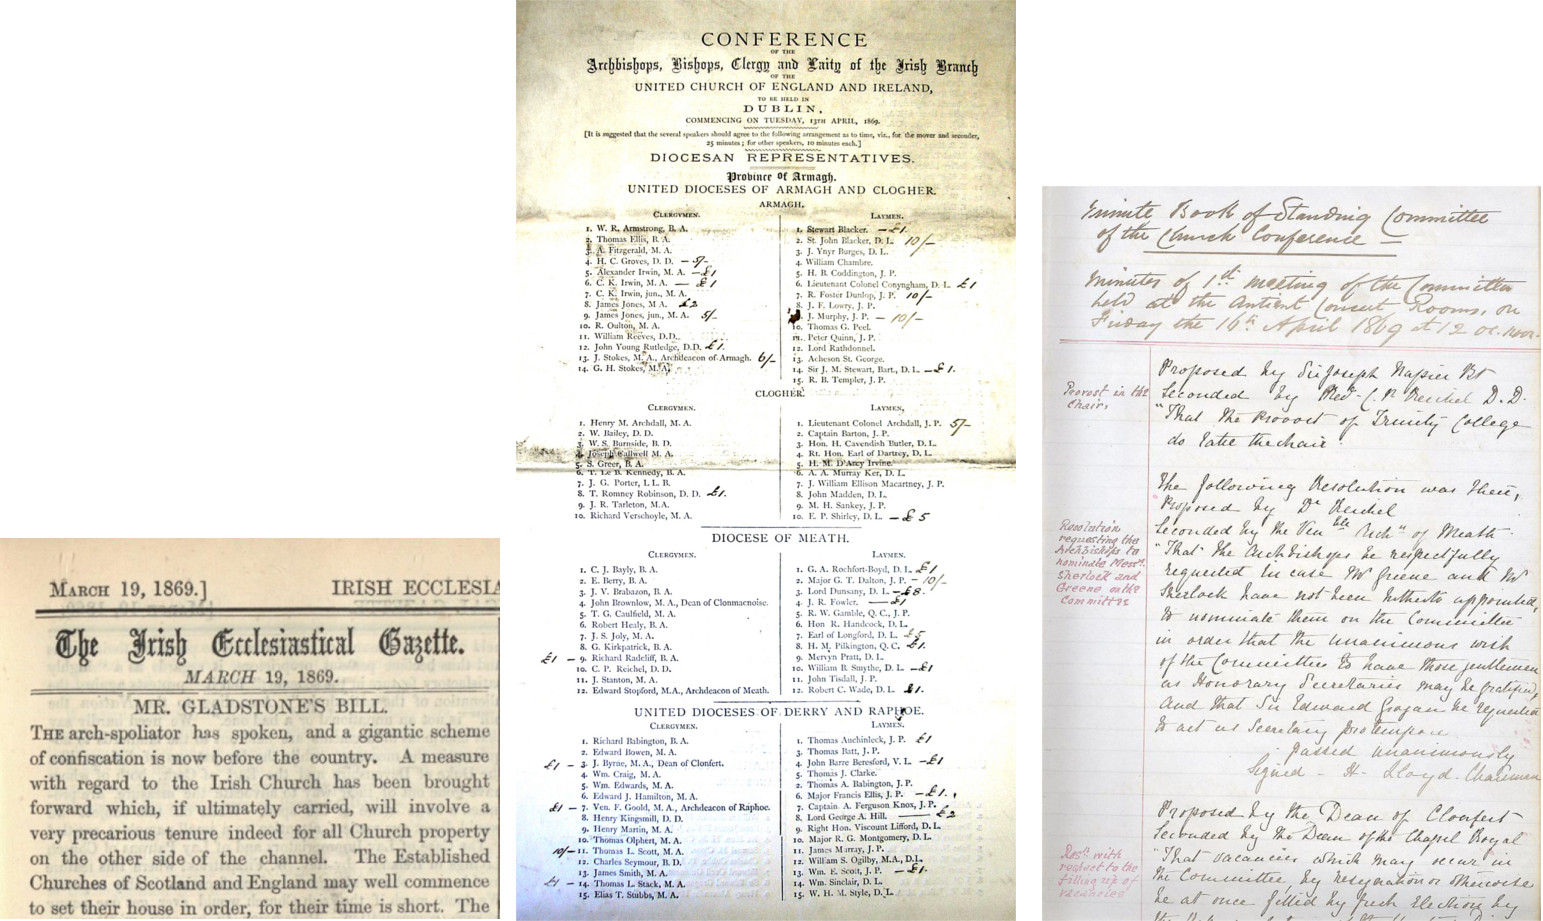 Left: Irish Ecclesiastical Gazette, 19 Mar. 1869. Centre: National Conference held April 1869. Right: Standing Committee of the National Conference.